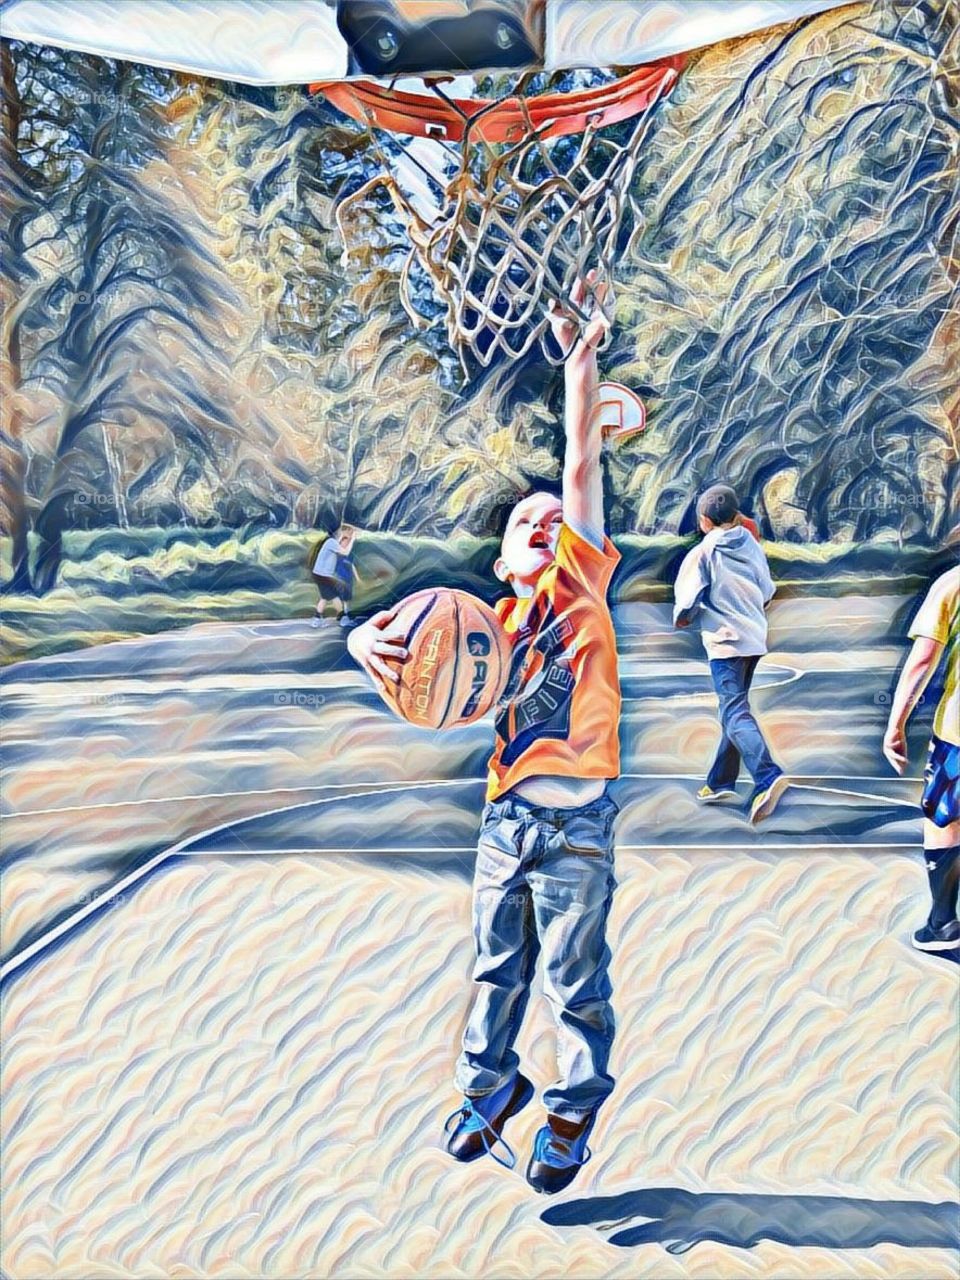 Cartoon style abstract of boy jumping up to touch basketball hoop.